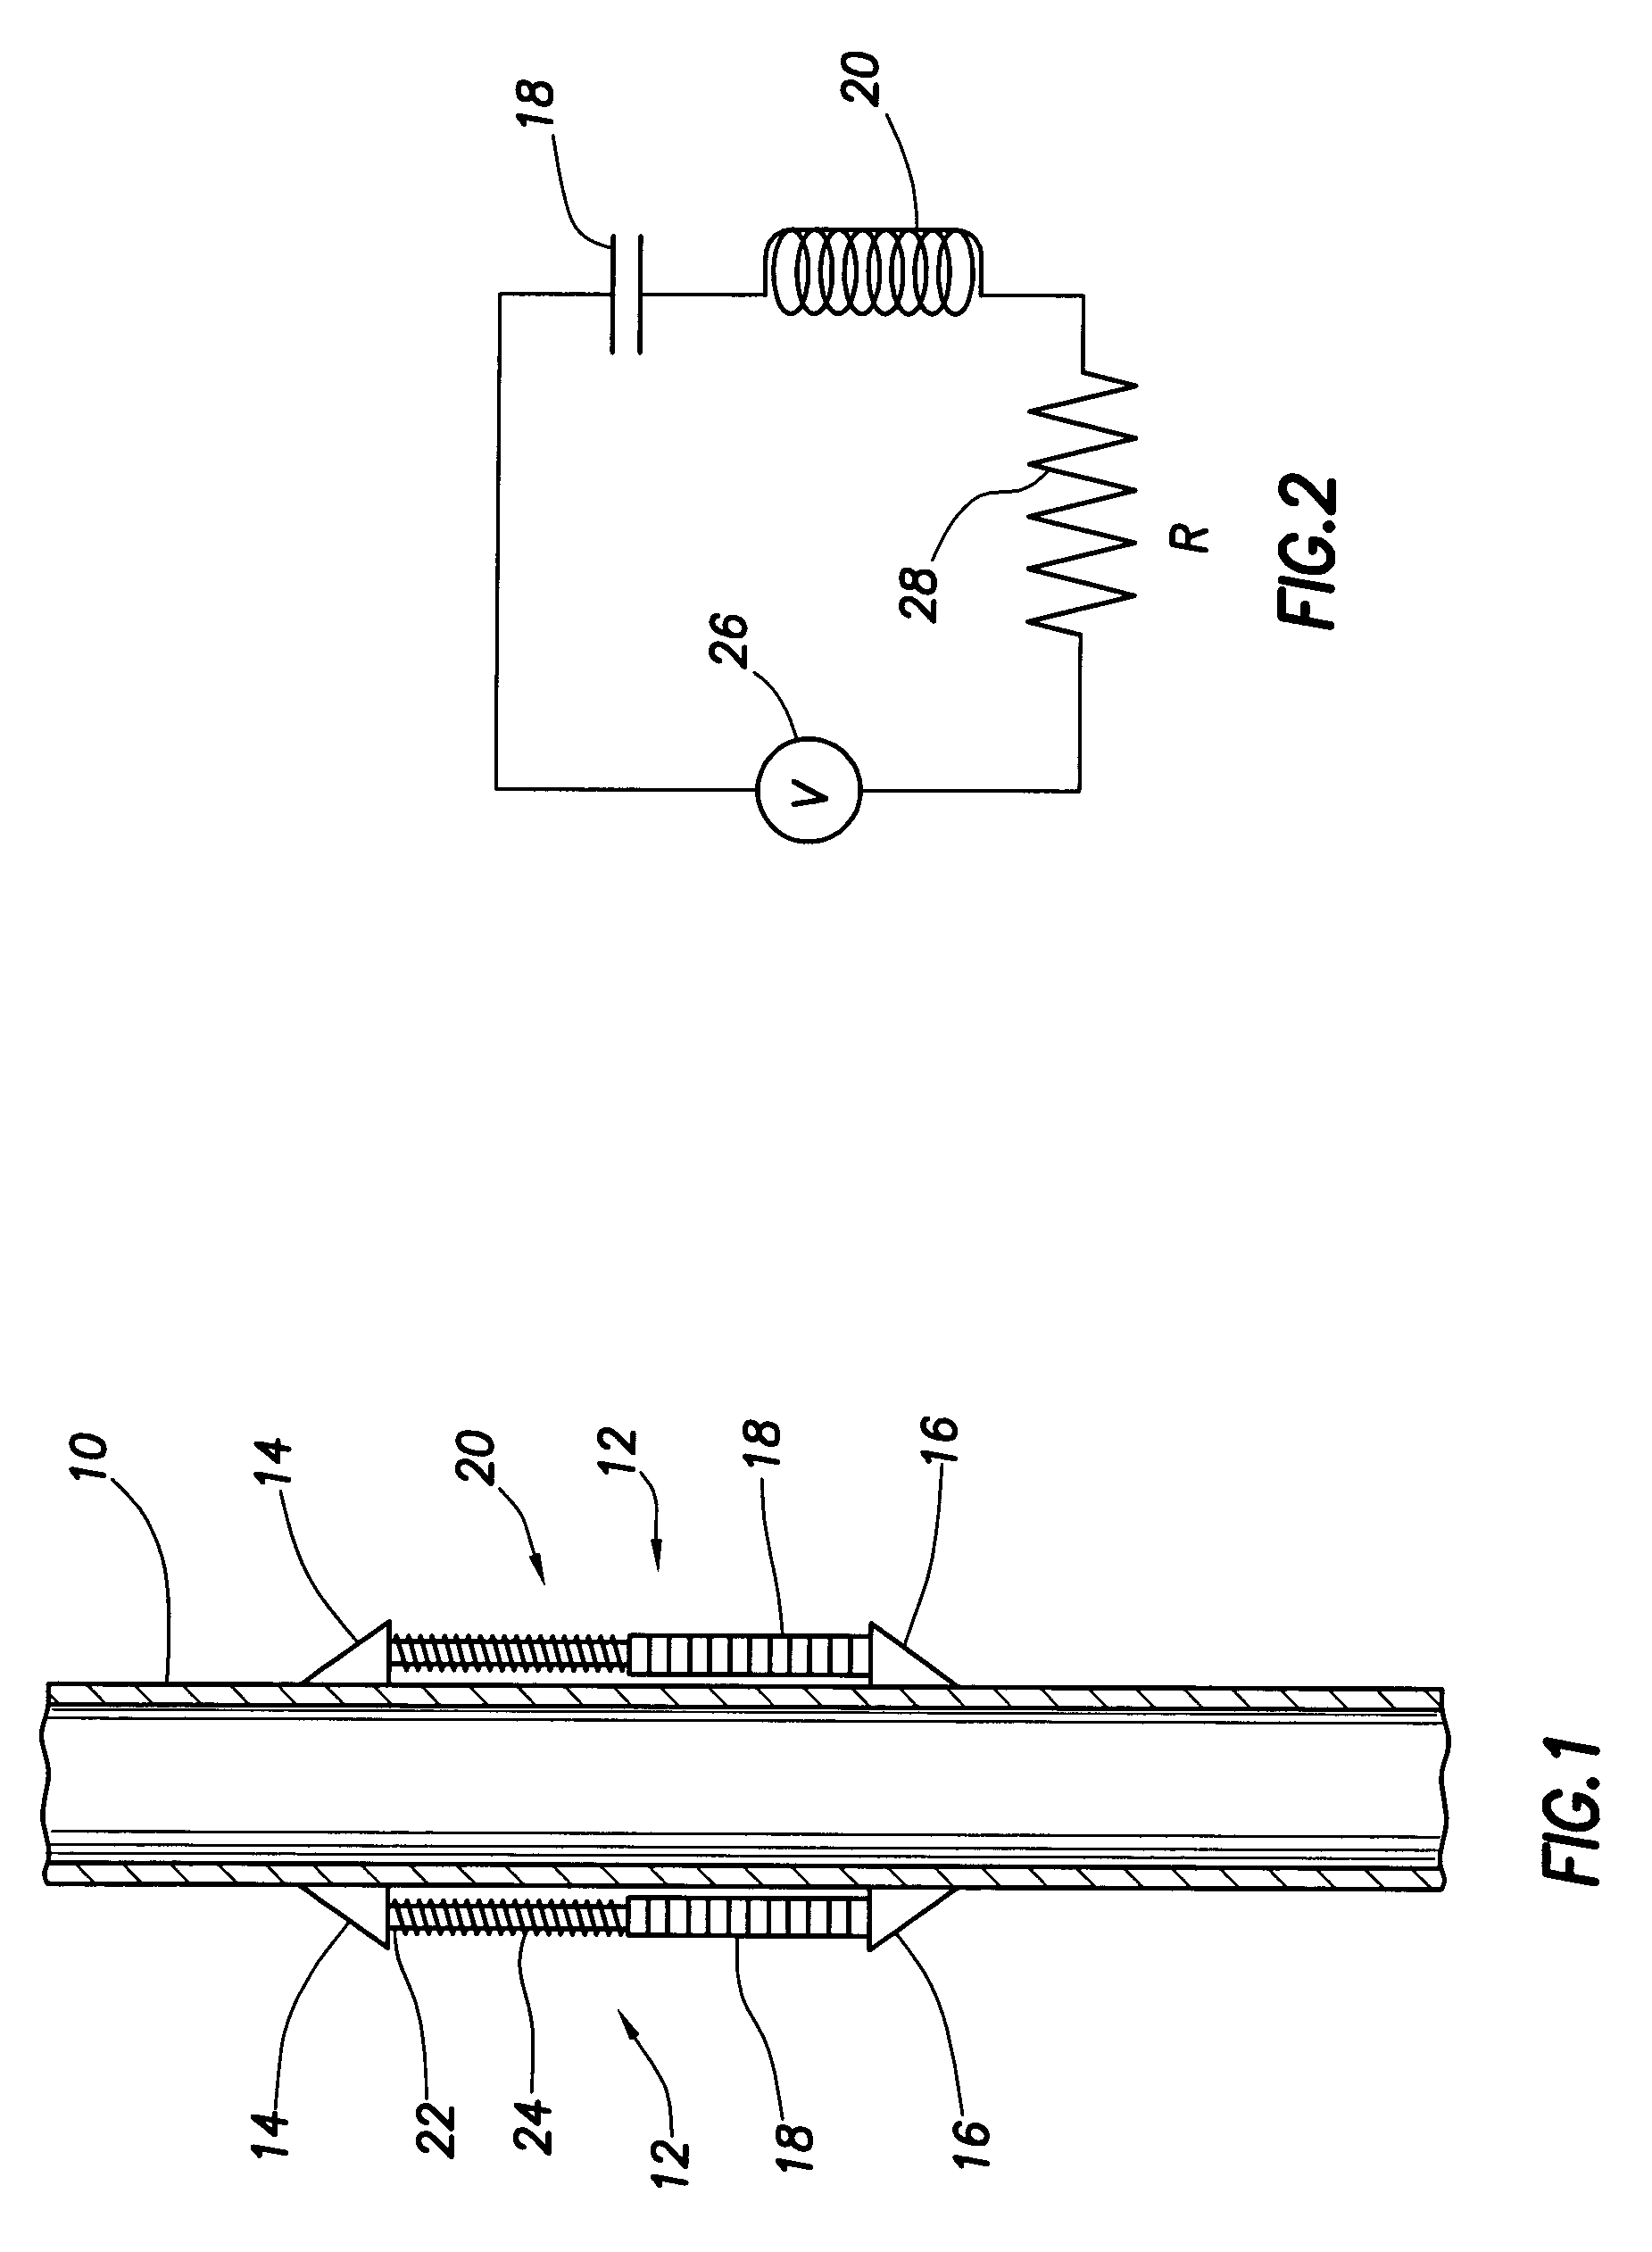 Hybrid piezoelectric and magnetostrictive actuator